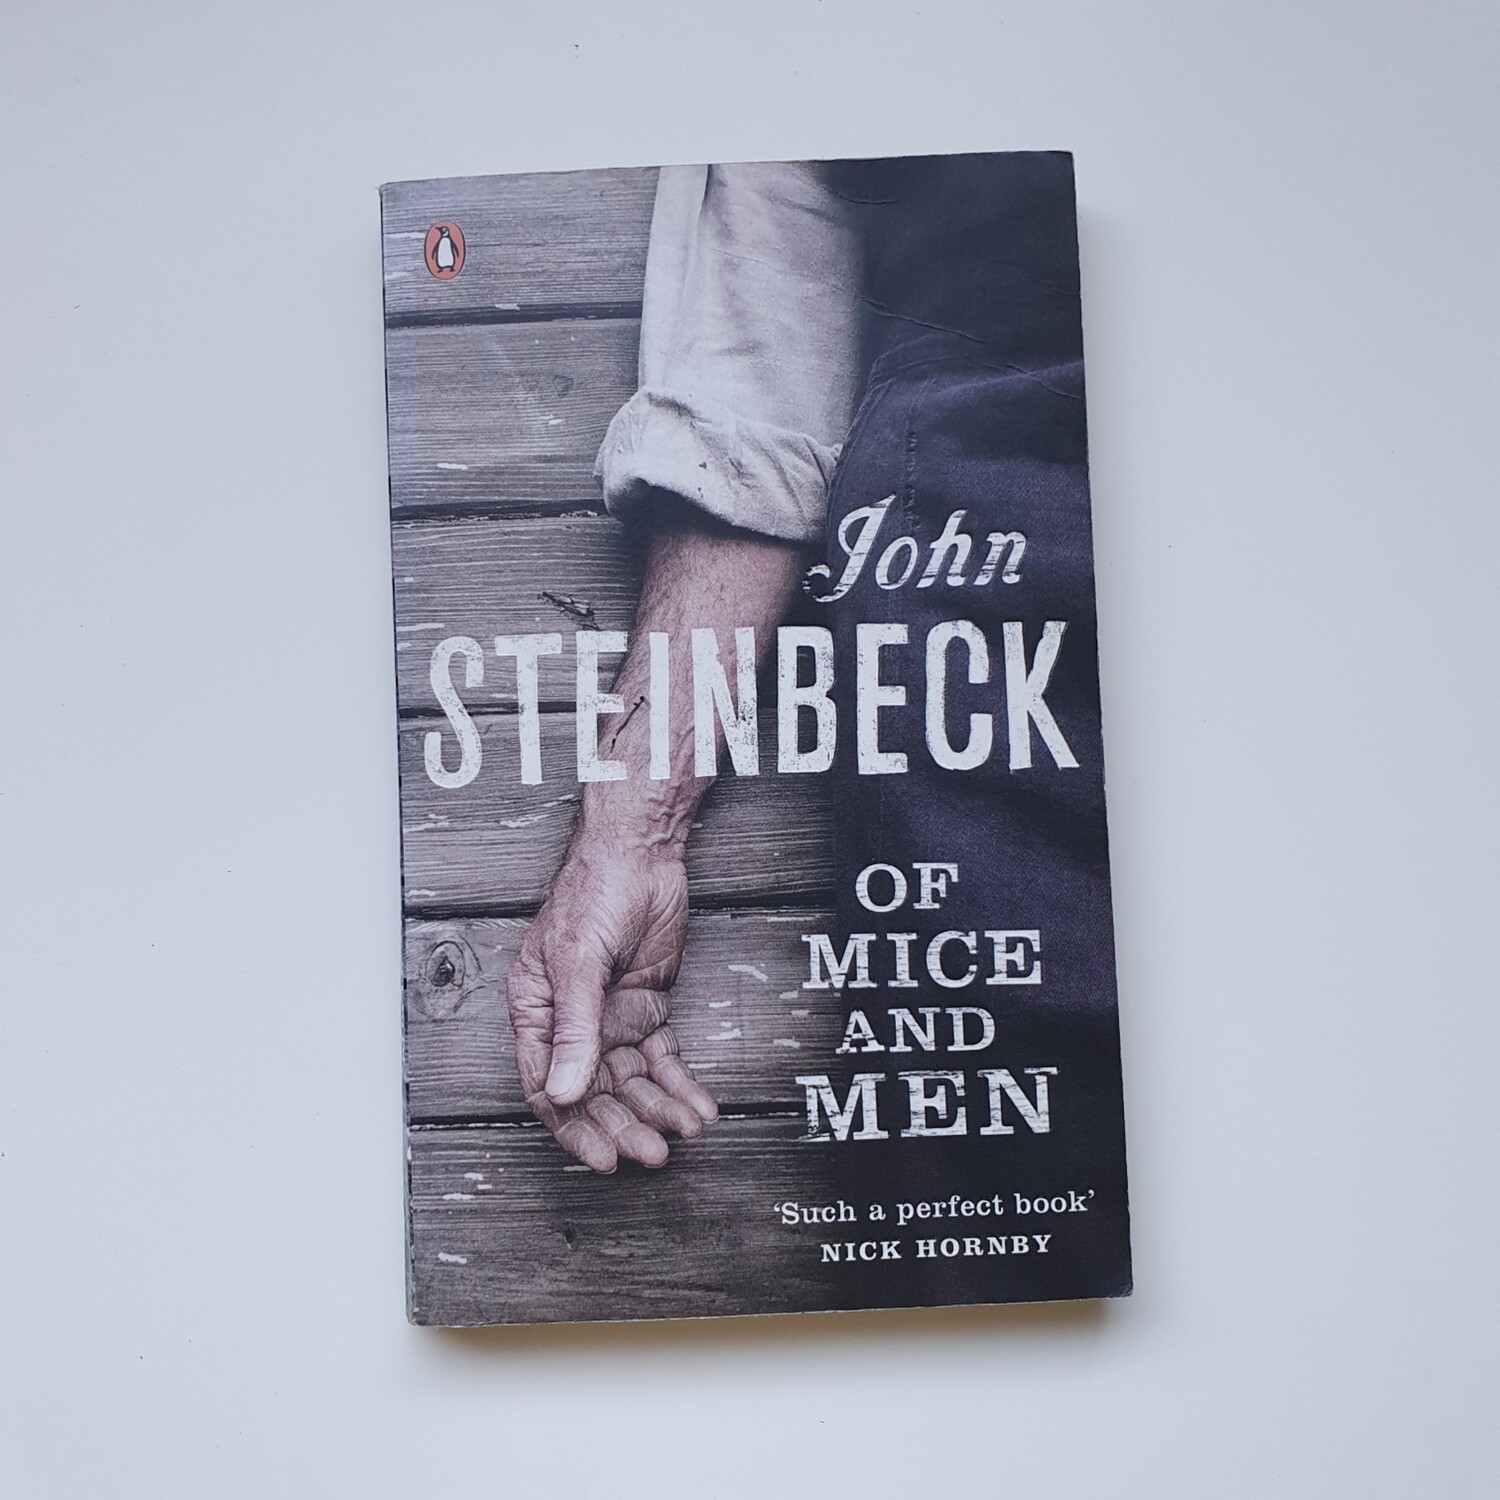 John Steinbeck - Of Mice and Men Notebook - made from a paperback book